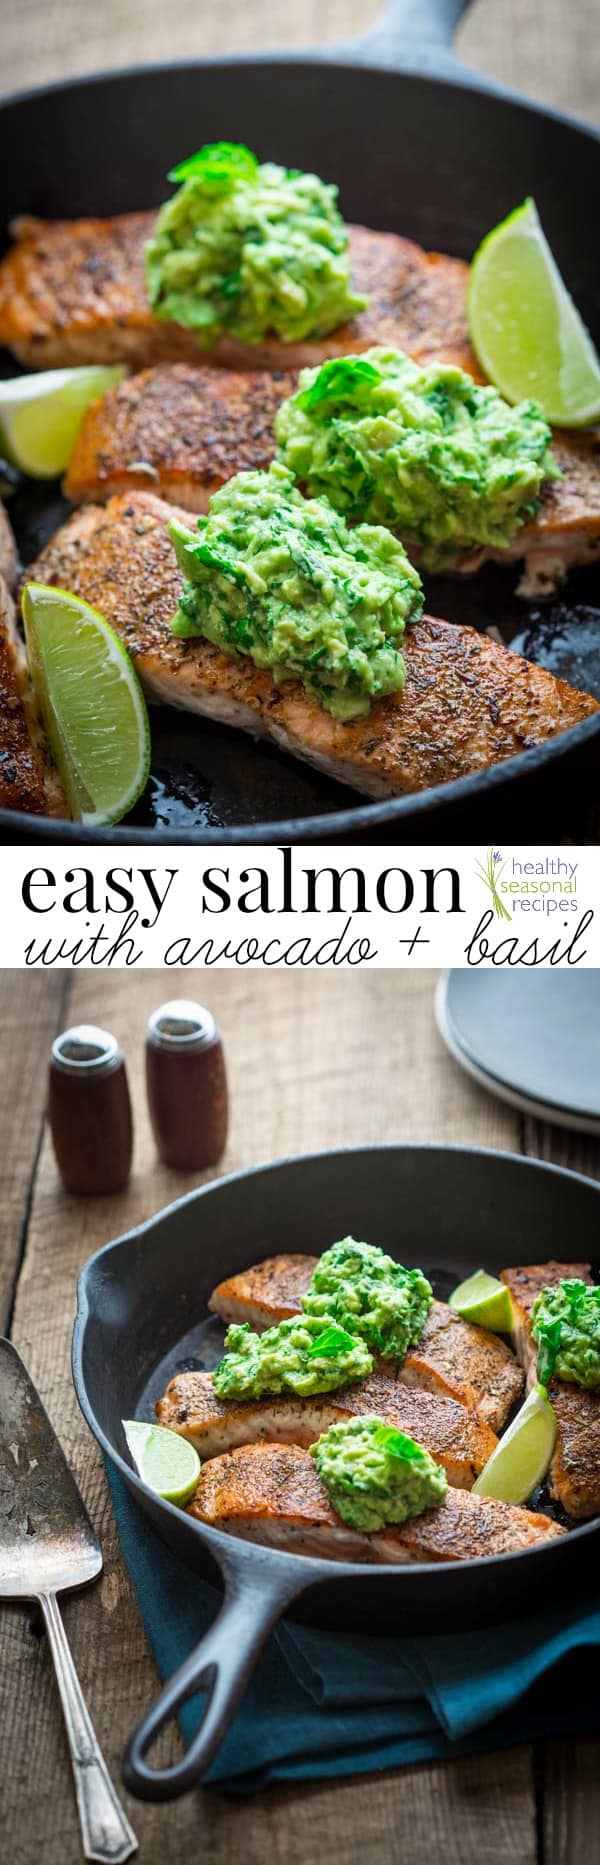 Salmon and avocado mash photo collage with text